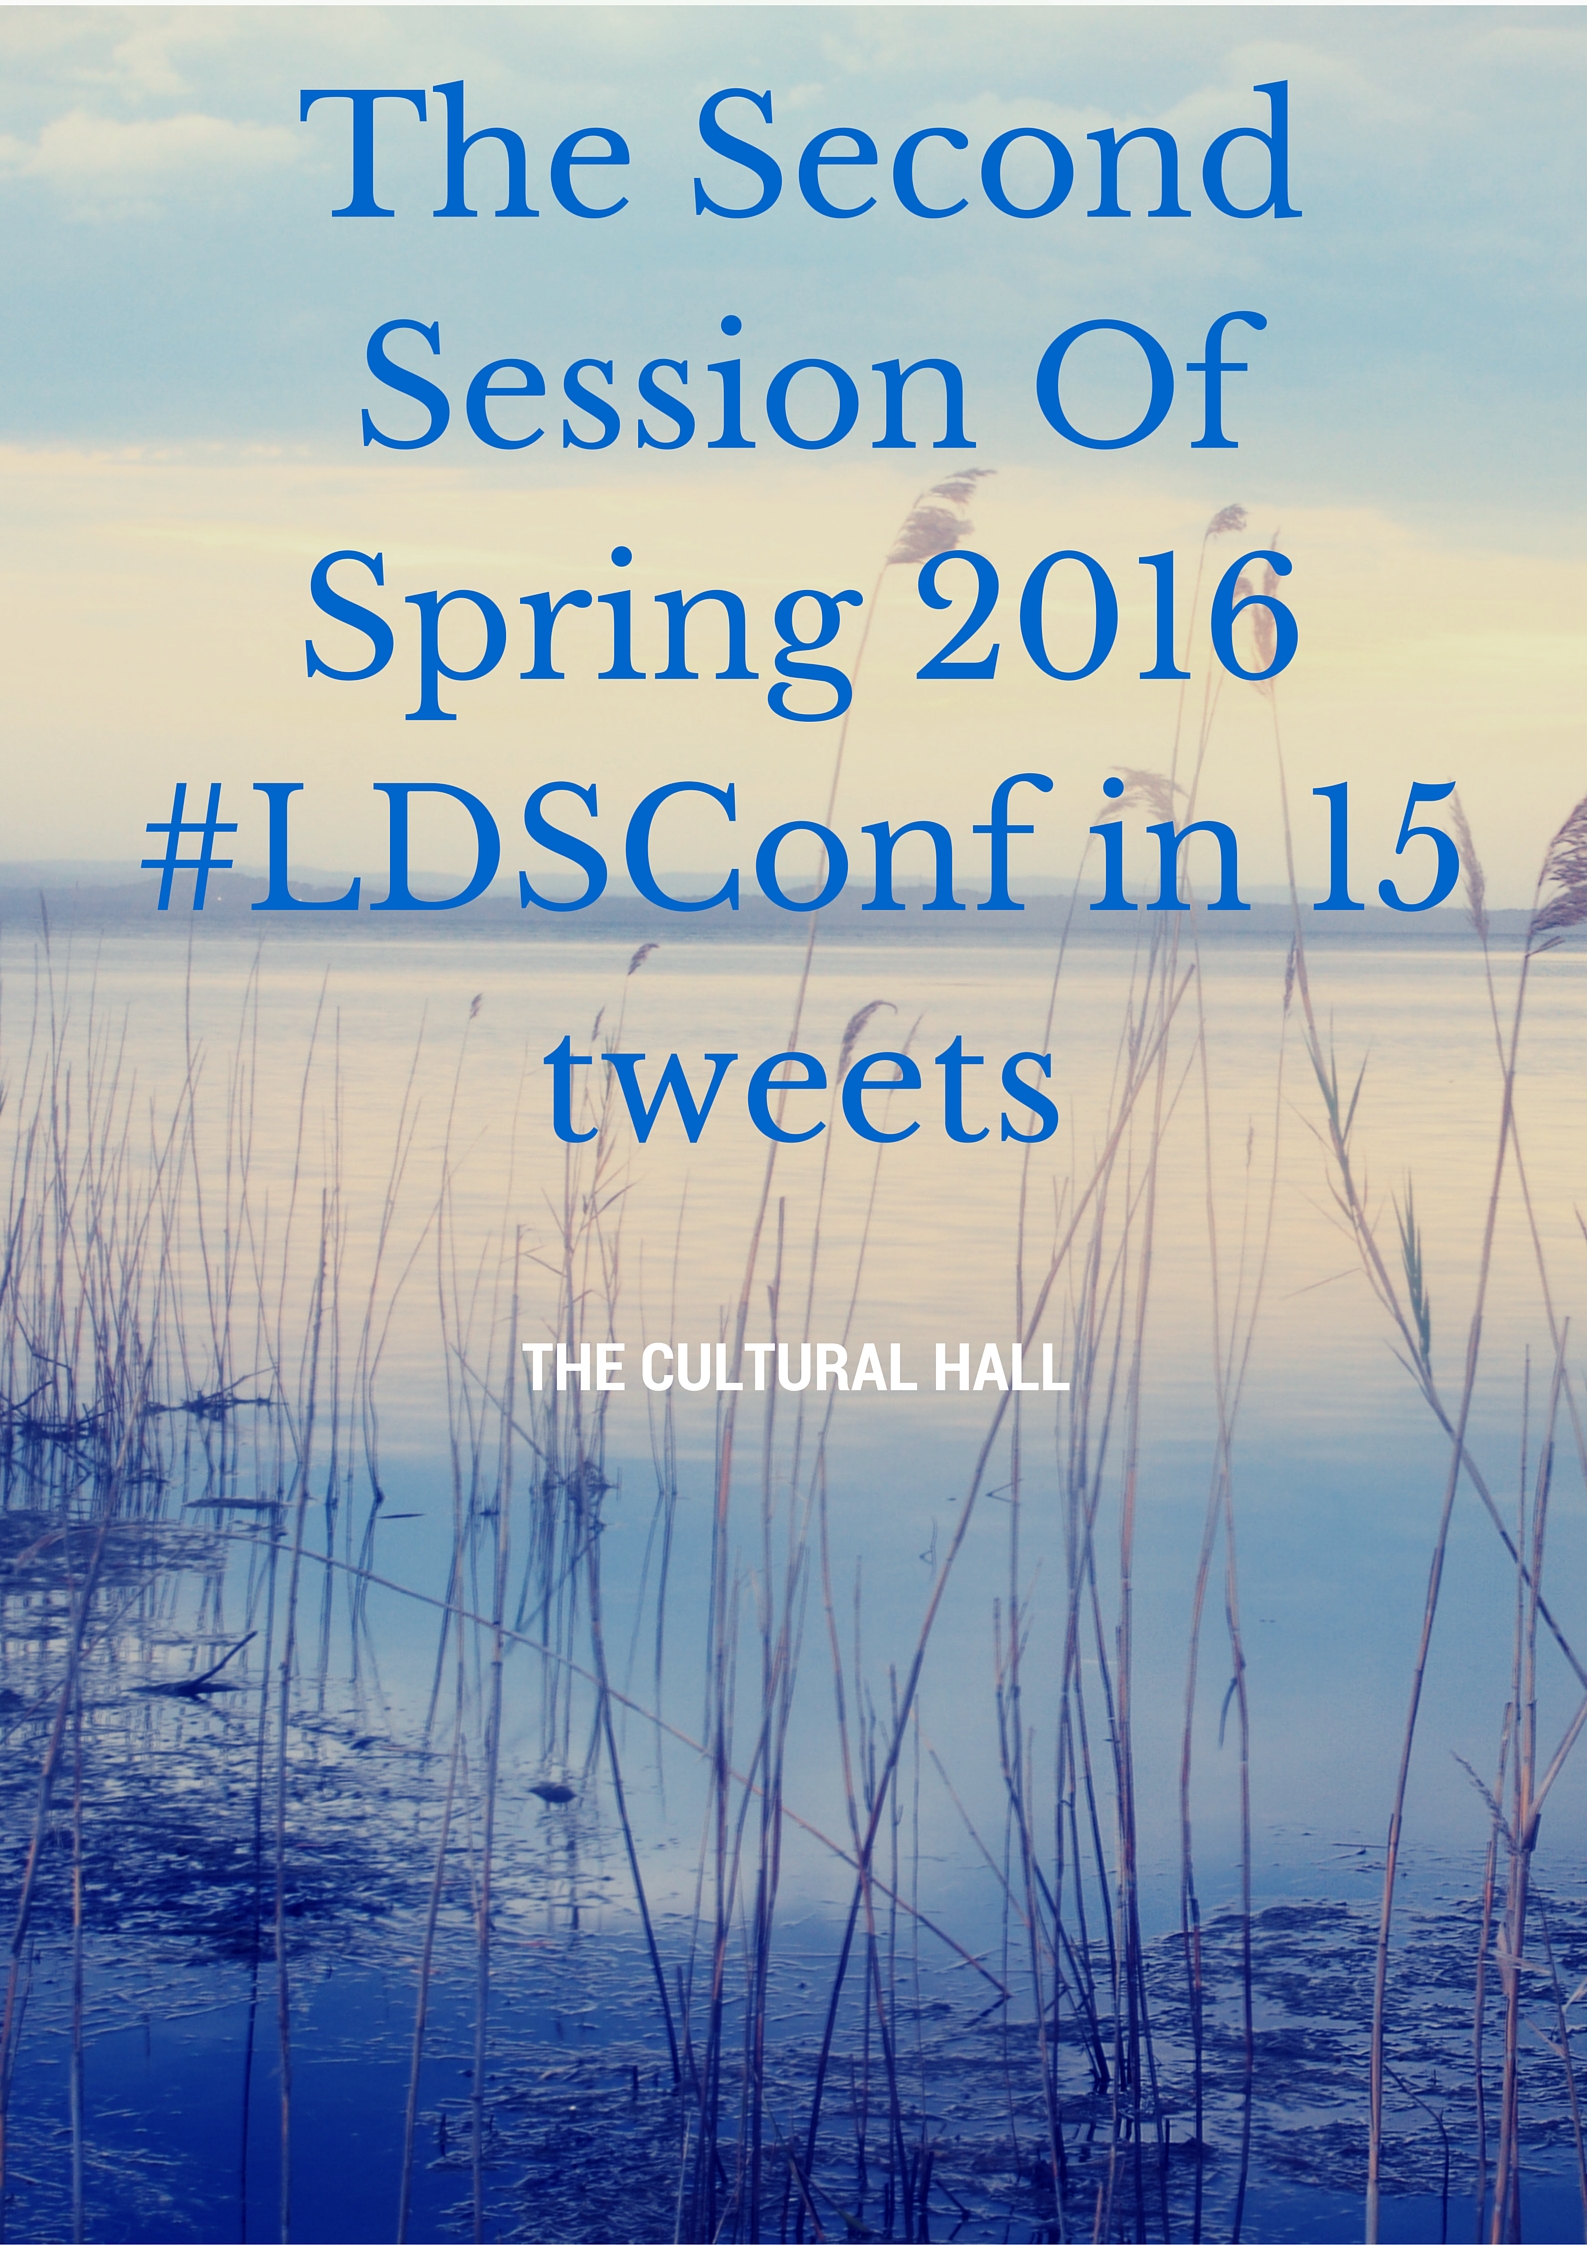 The Second Session Of Spring 2016 #LDSConf in 15 tweets